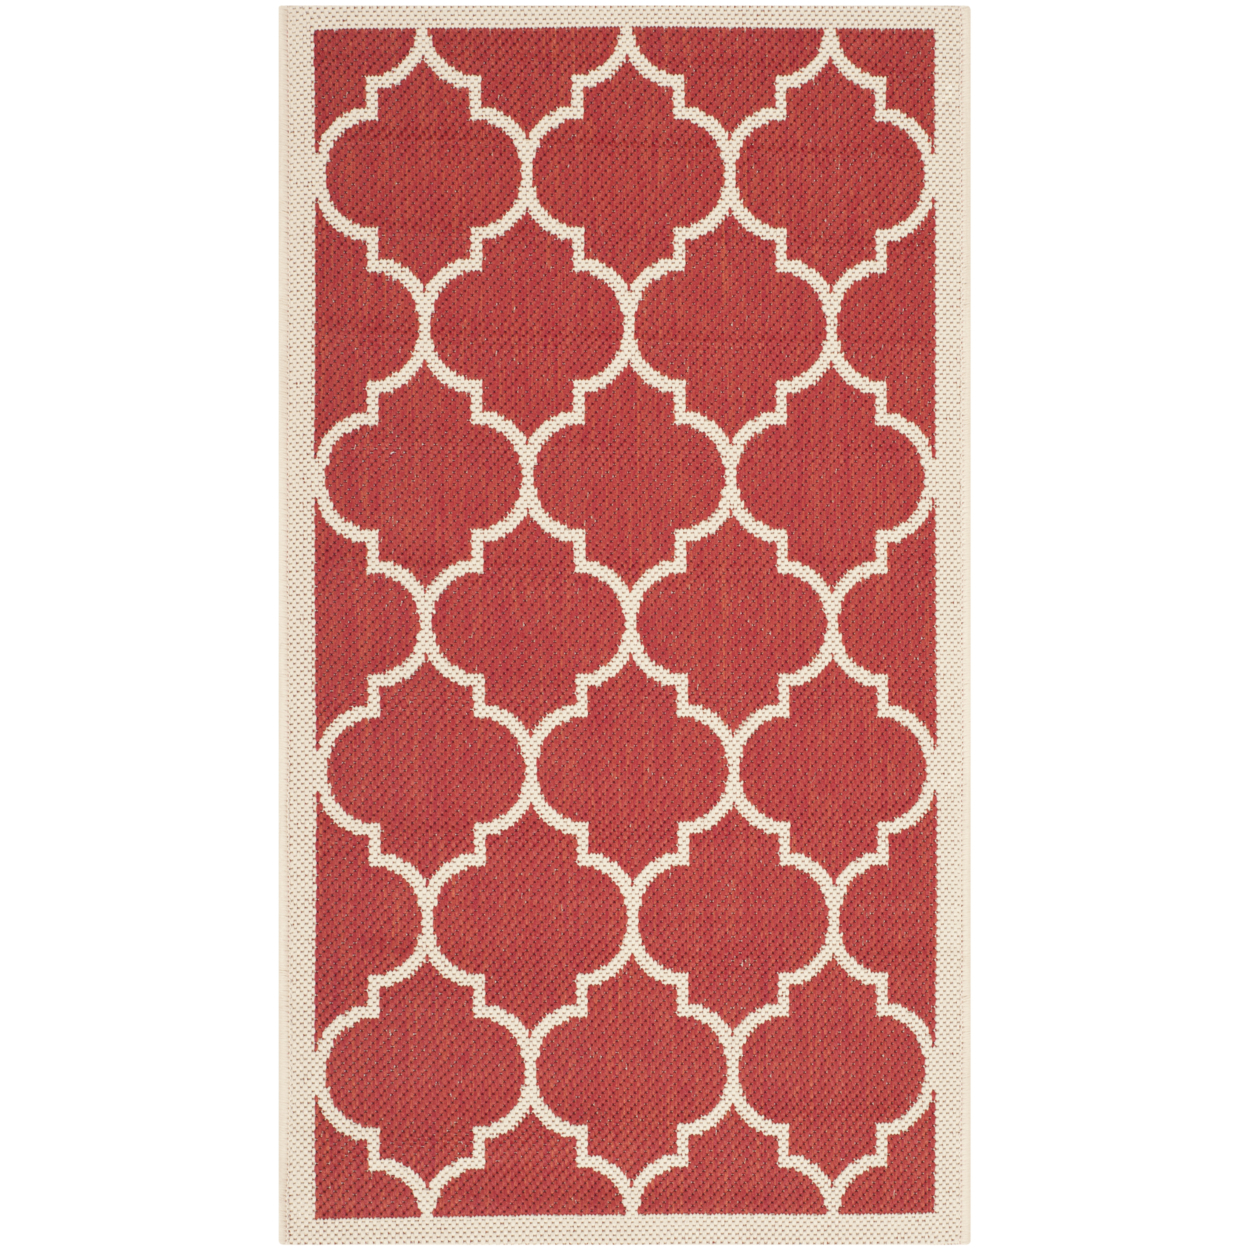 SAFAVIEH Outdoor CY6914-248 Courtyard Collection Red / Bone Rug - 2' 3 X 10'